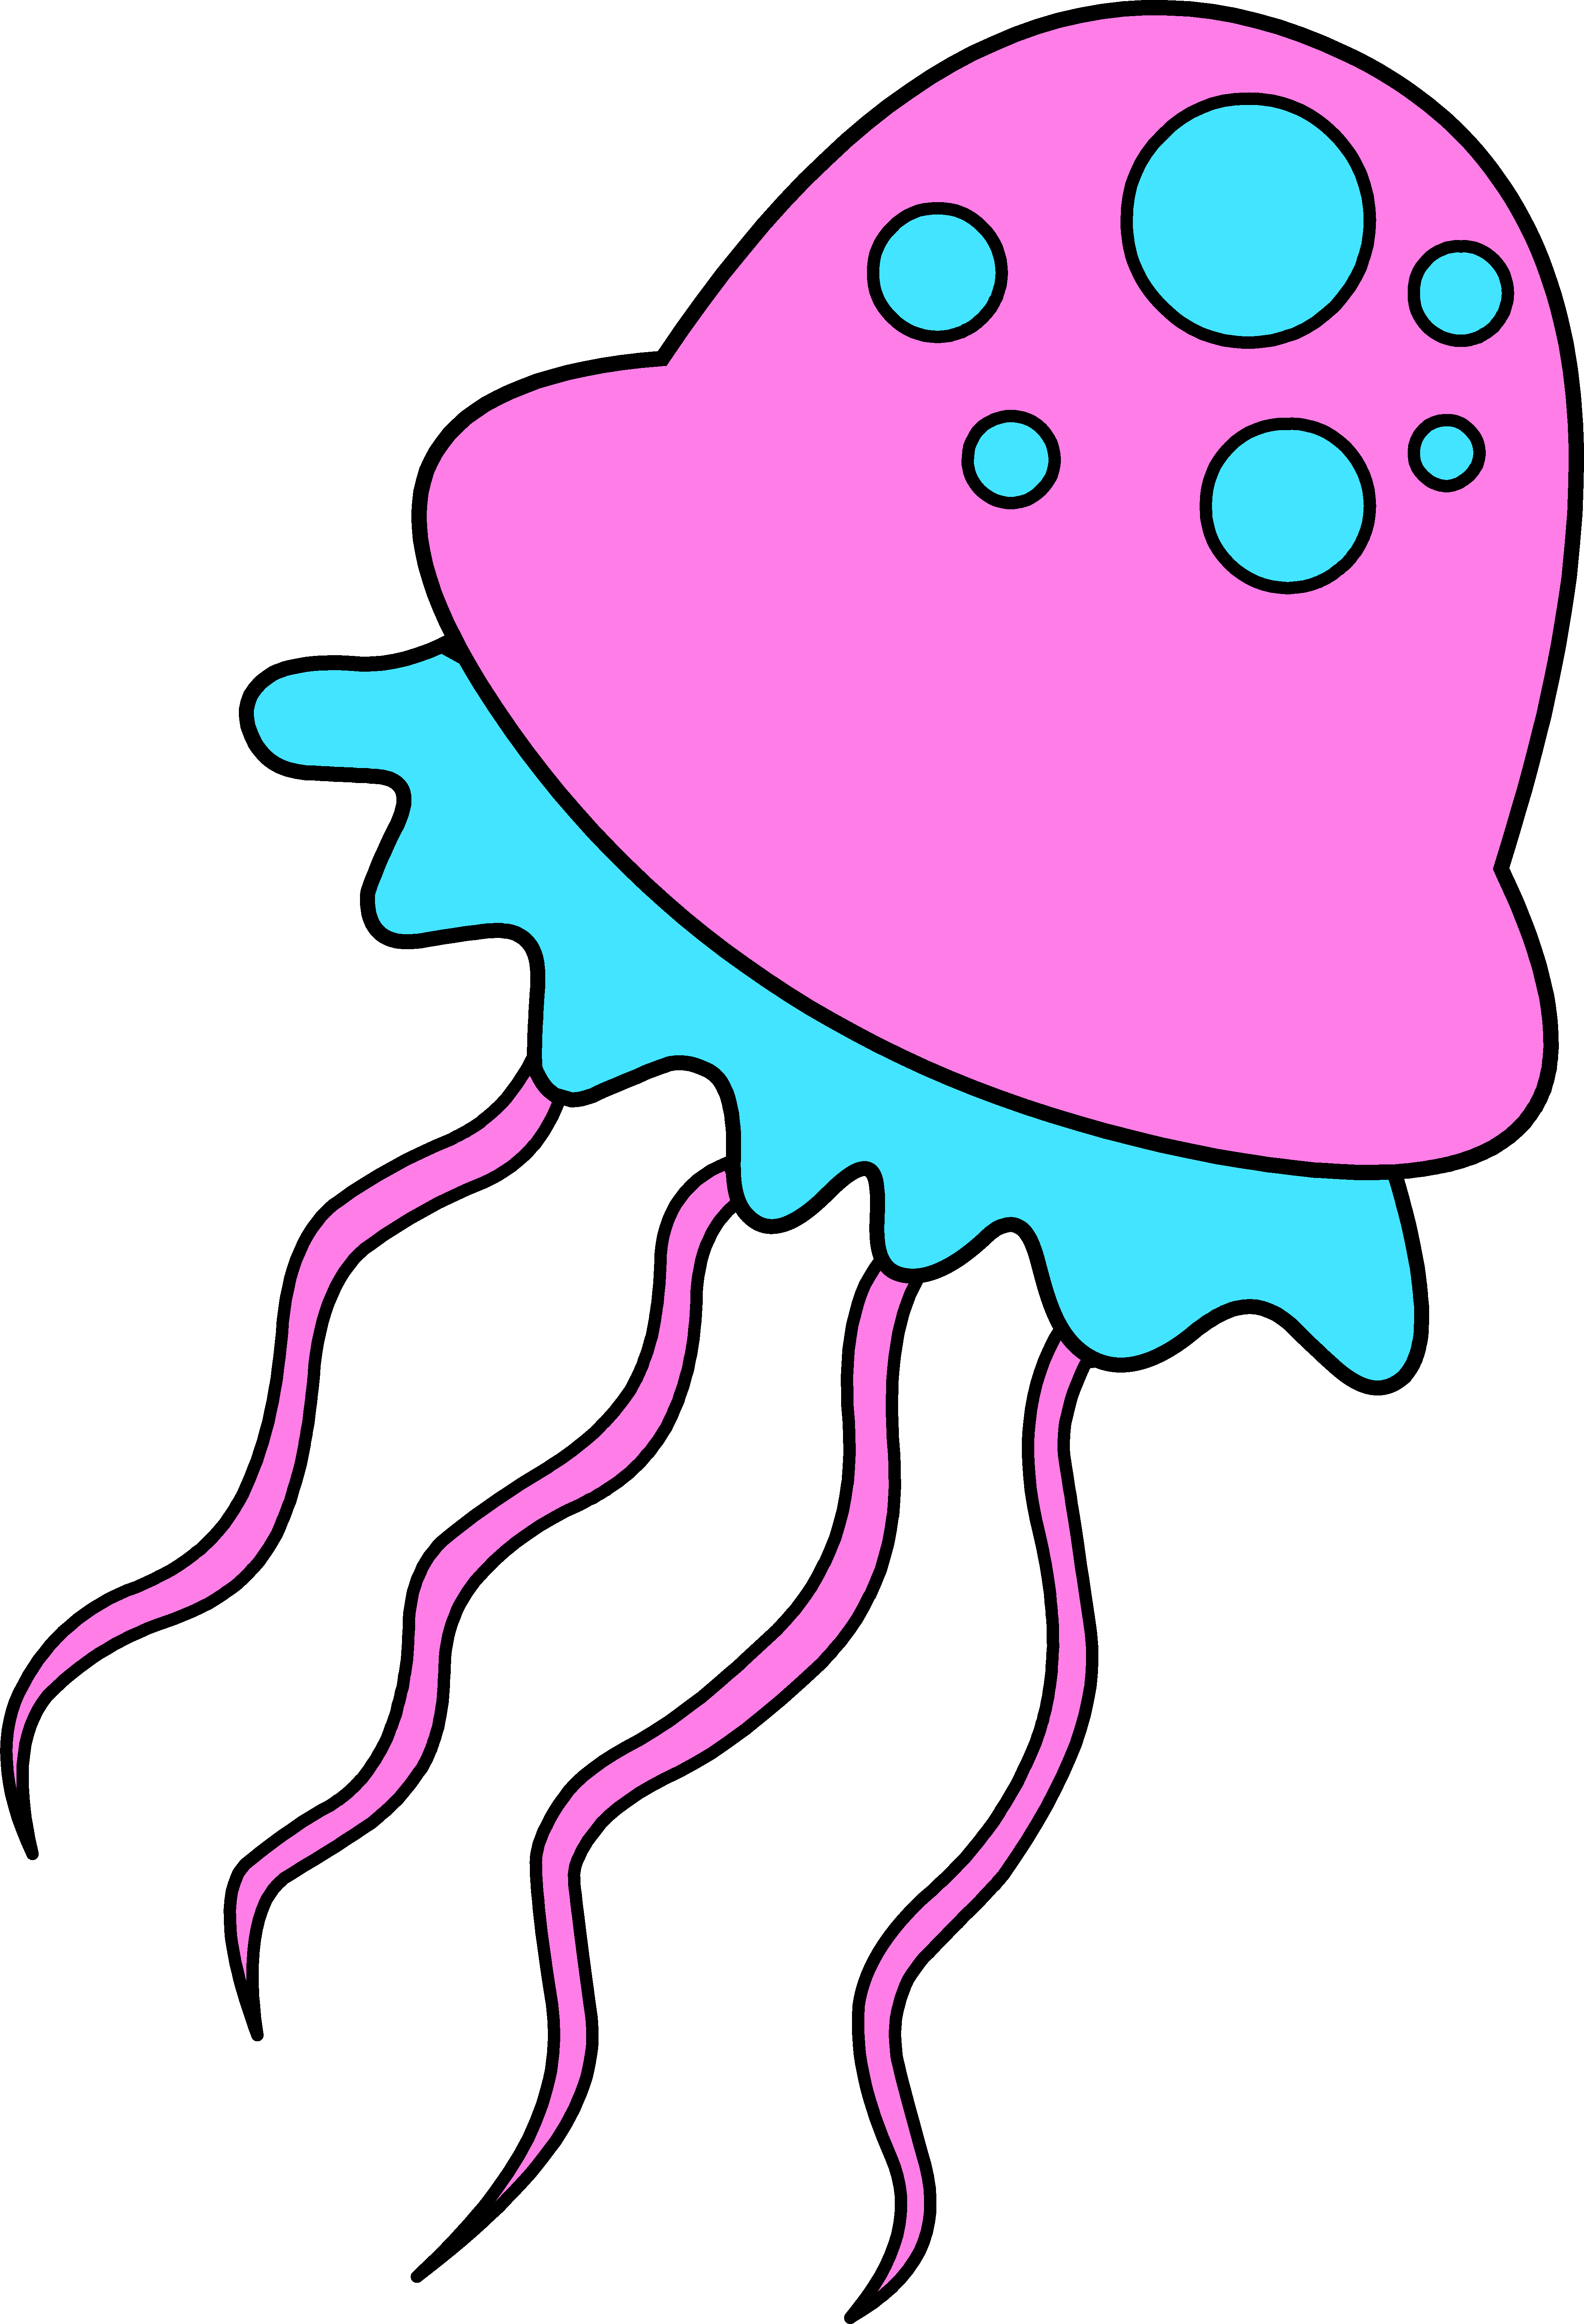 Jellyfish clipart png transparent background.